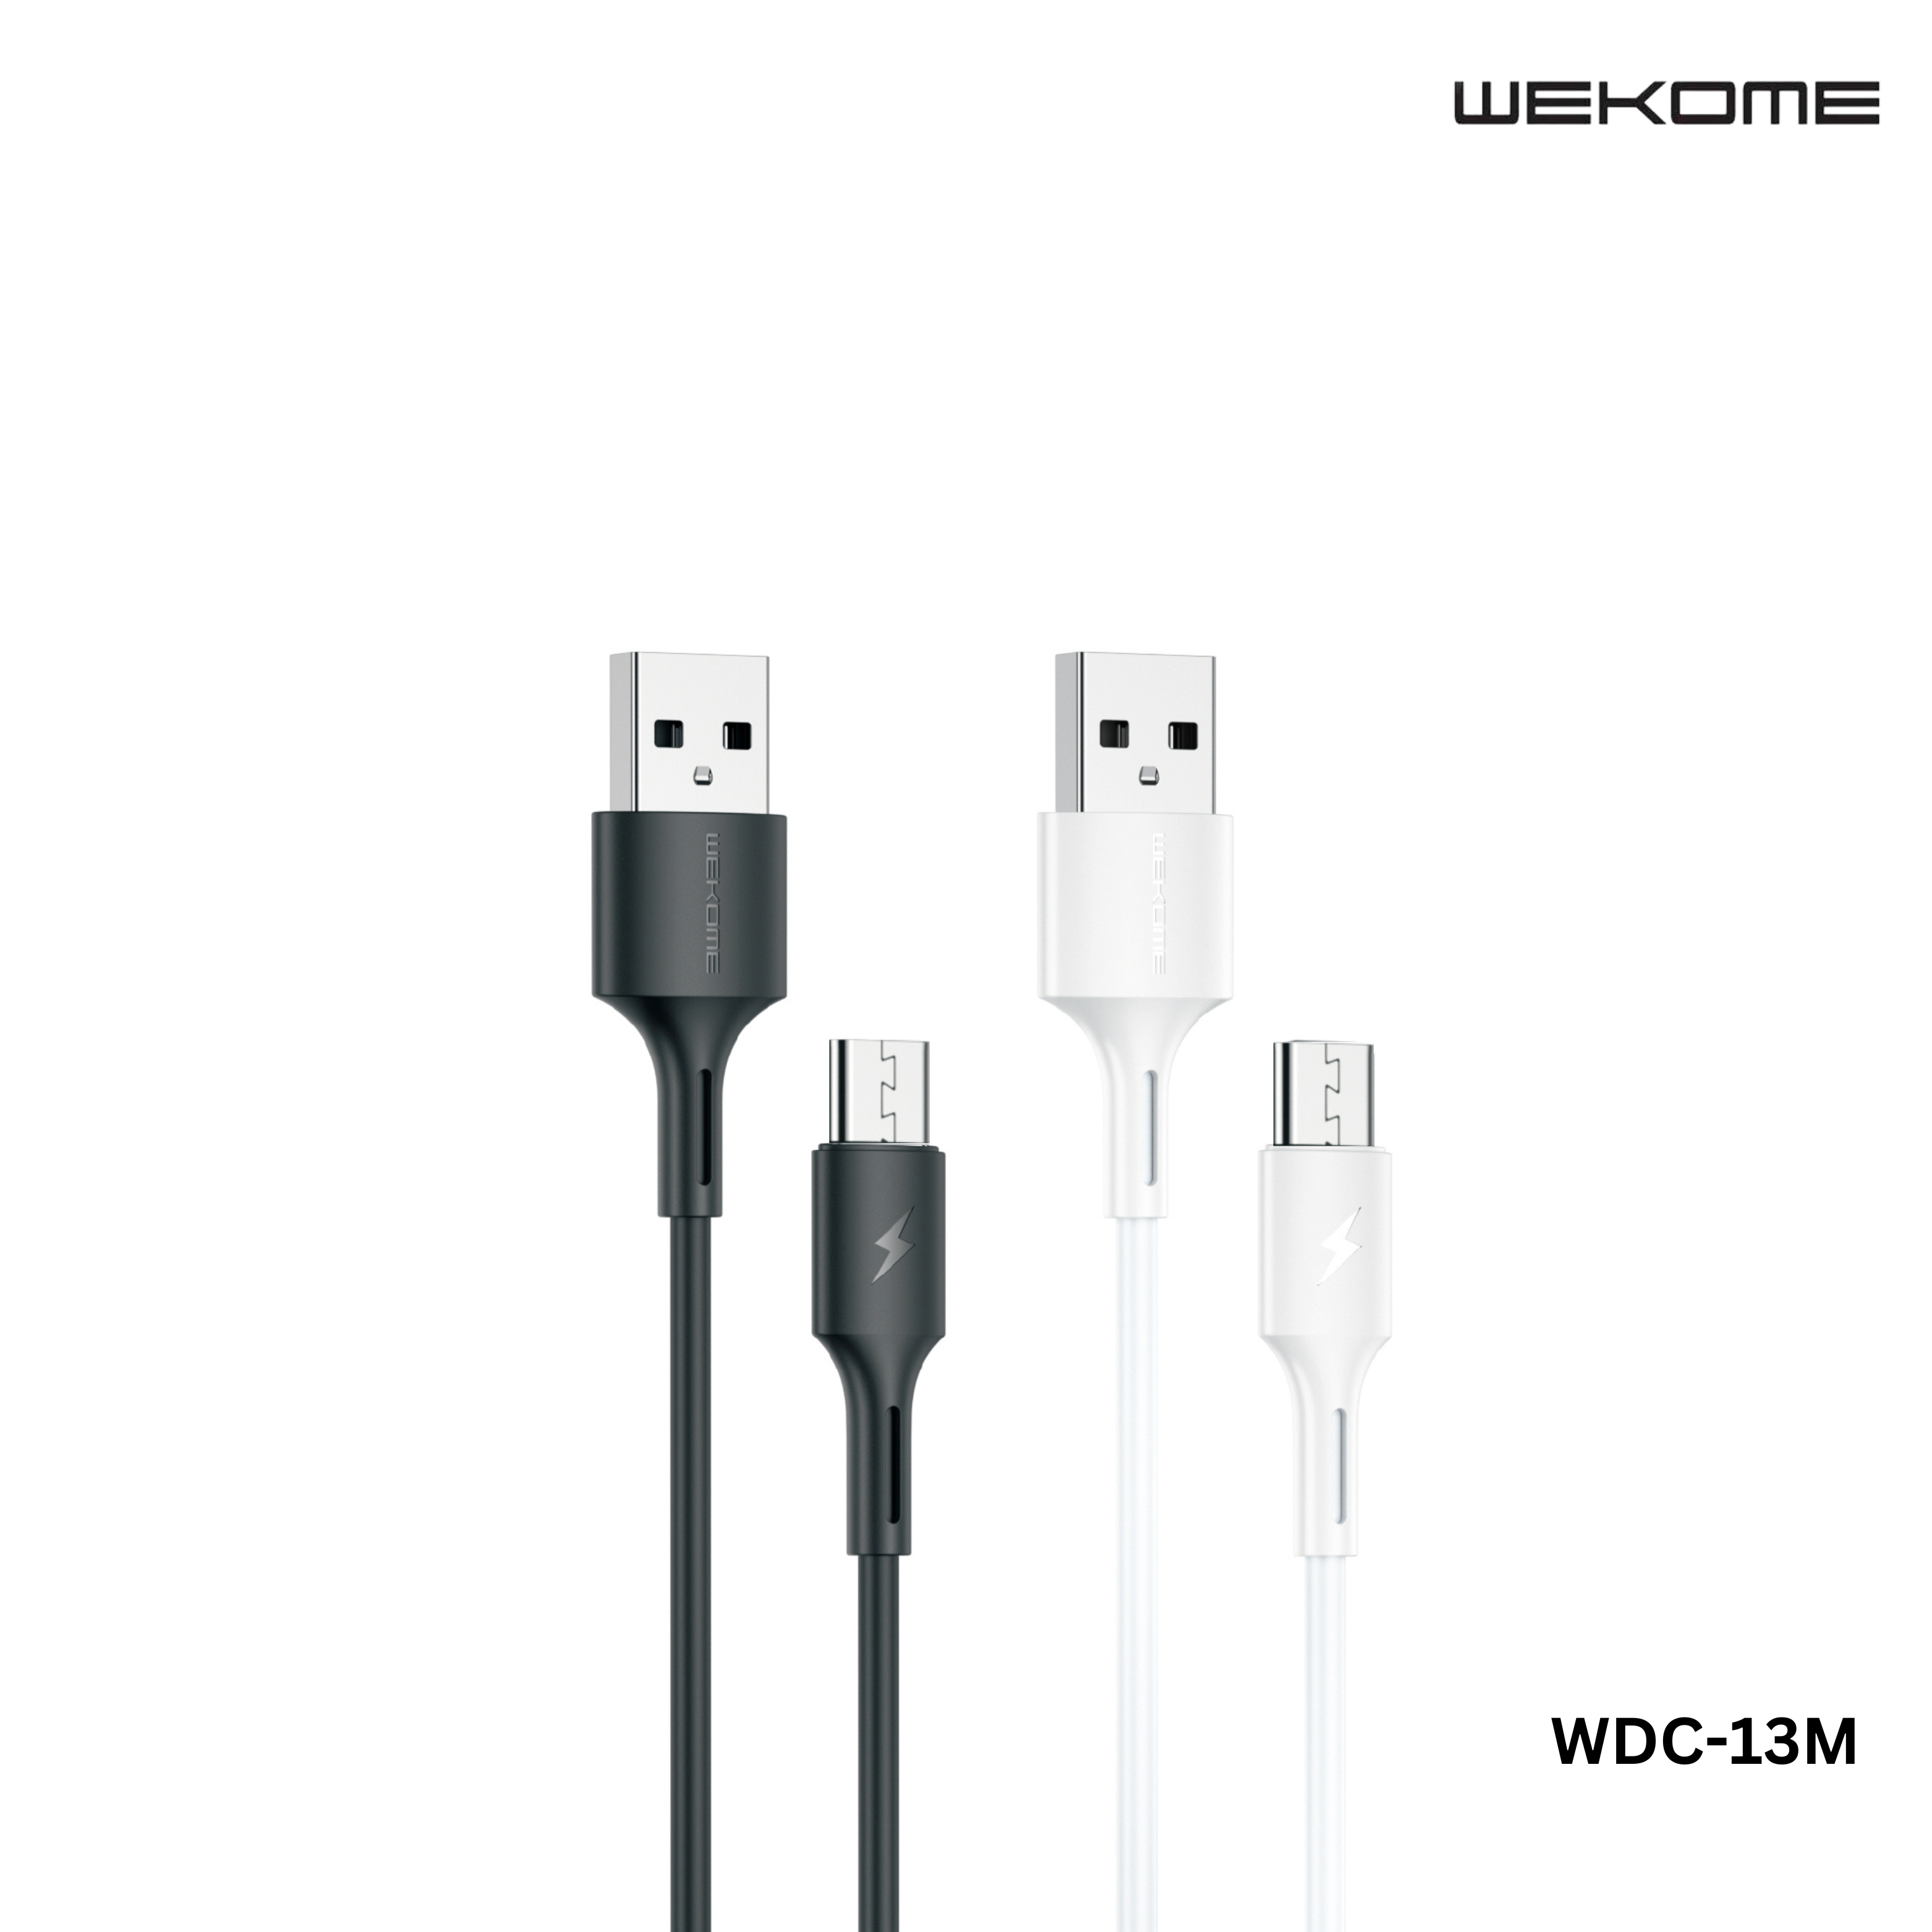 WEKOME Micro Cable (WDC-136M) YOUPIN SERIES 3A DATA CABLE FOR MICRO (1M) (3A), Android Cable, Charging Cable, Android Charging Cable-Black